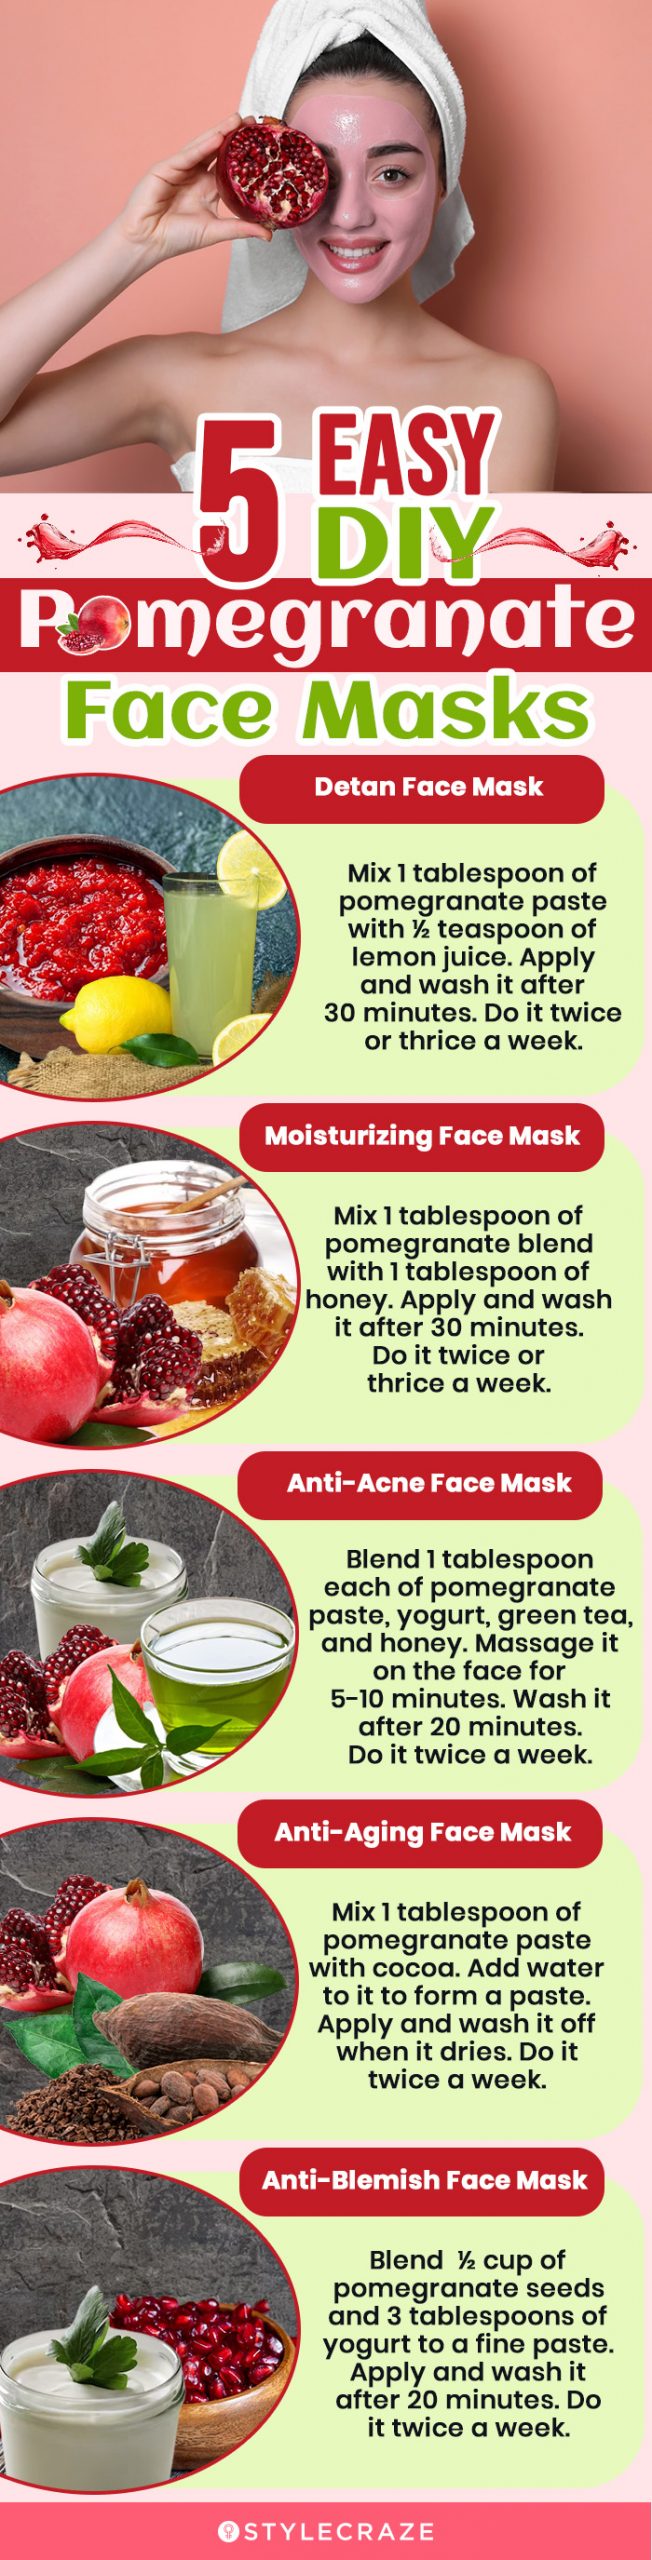 5 easy to make diy pomegranate face masks (infographic)